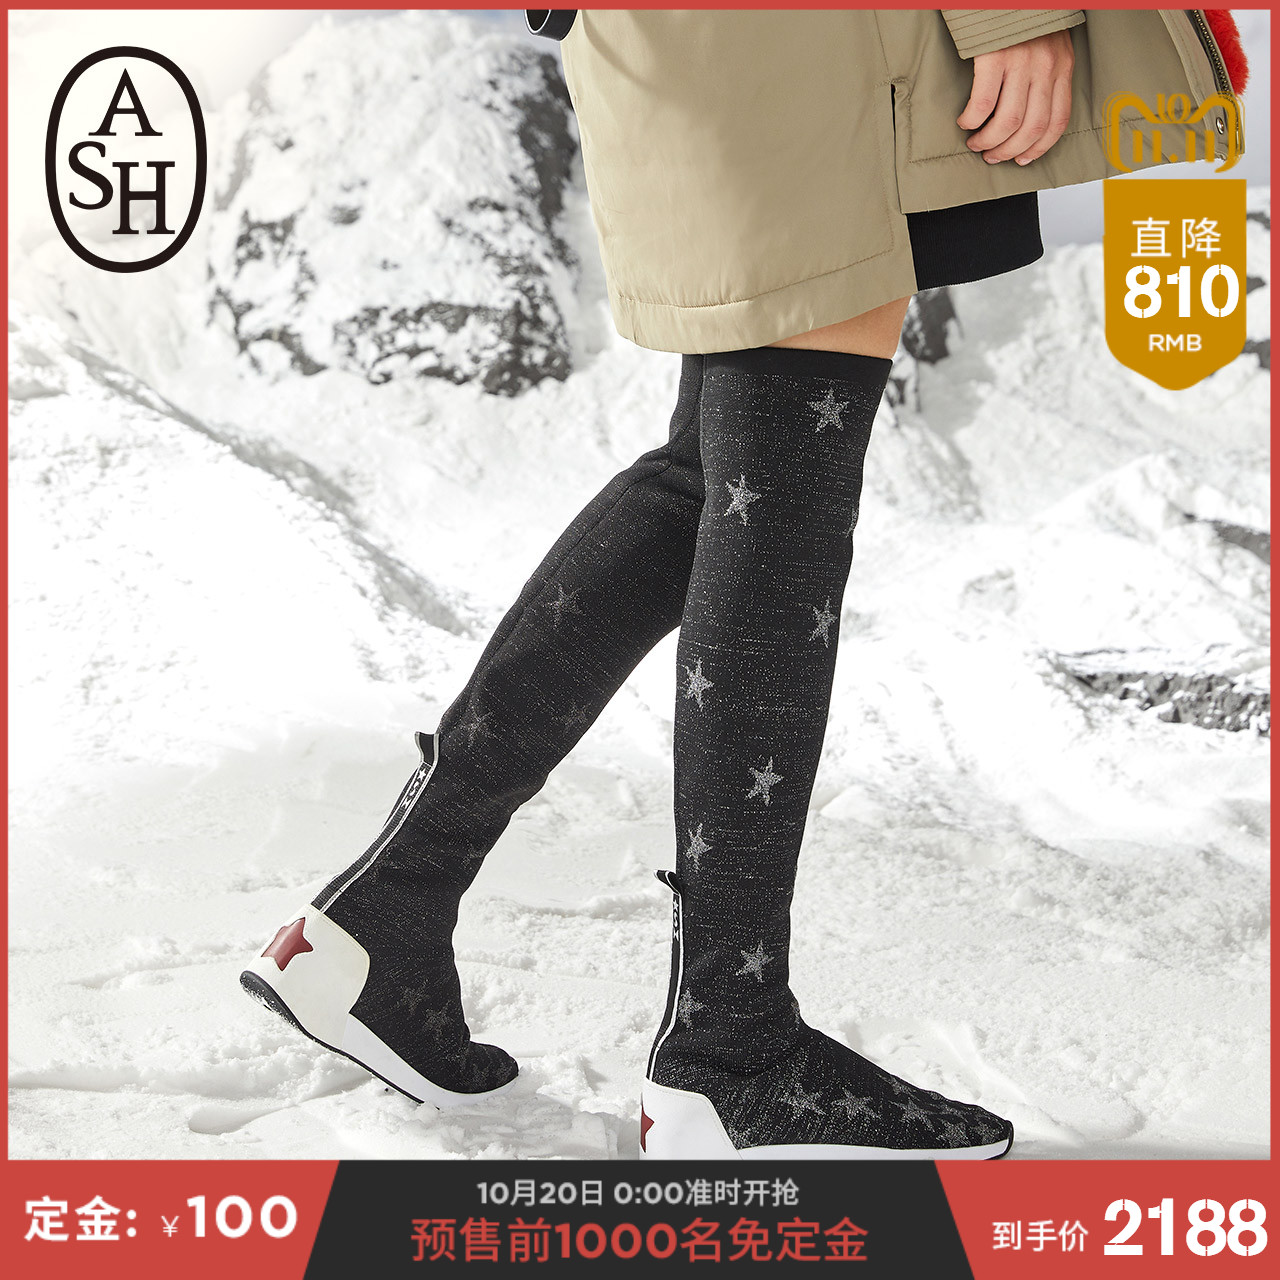 ASH Women's Shoes New JEWEL Series Star Element Boots Fashionably Knitted Knee Boots in Autumn and Winter